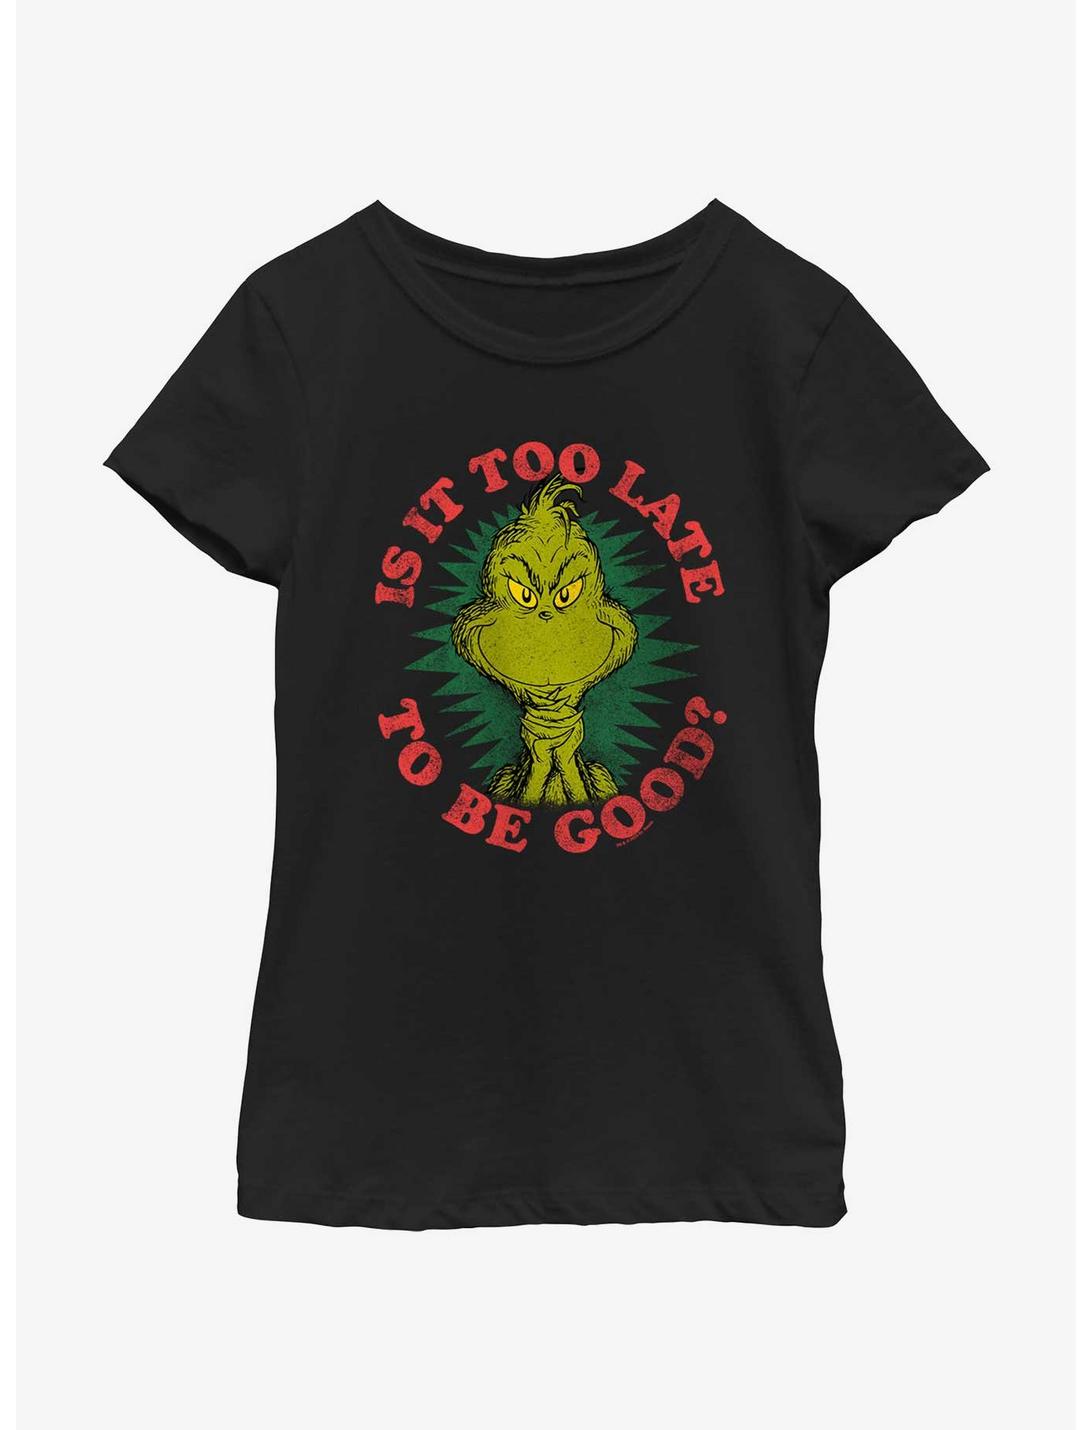 Dr. Seuss Grinch Is It Too Late To Be Good Youth Girls T-Shirt, BLACK, hi-res